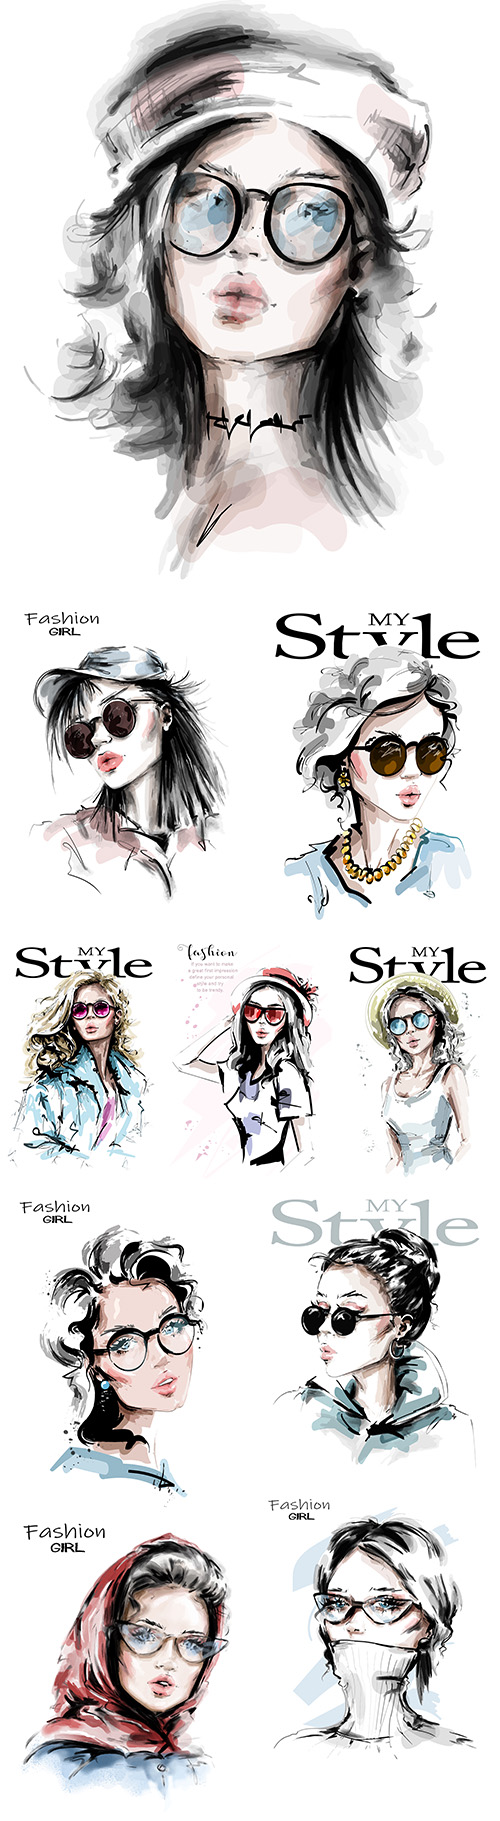 My style Hand drawn beautiful young and fashion girl 5
